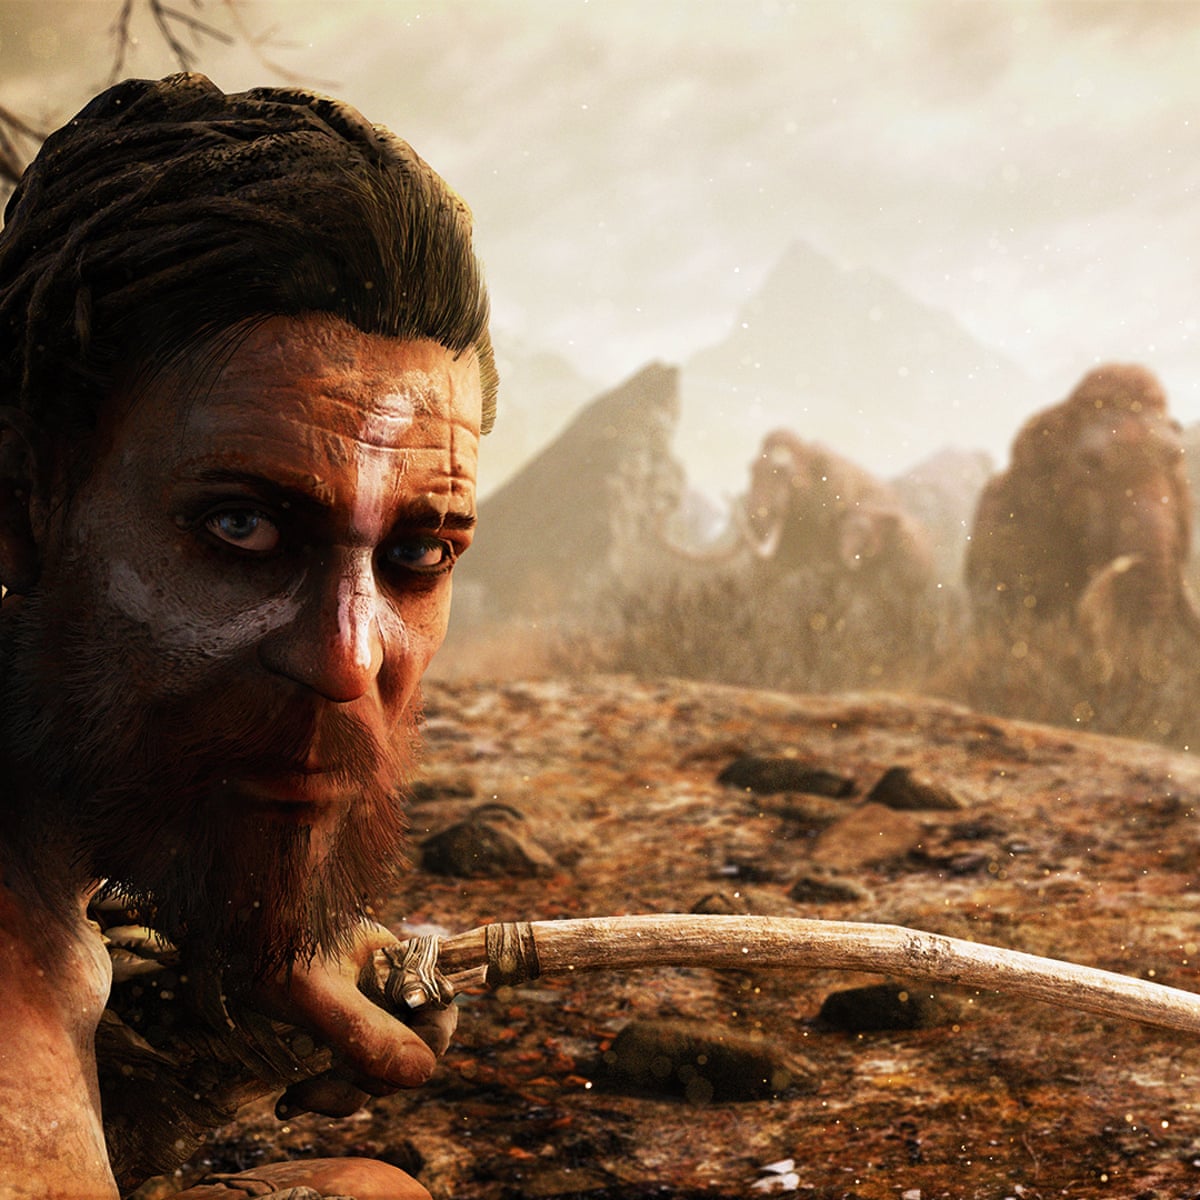 Pekkadillo scheren trechter Far Cry Primal review – great gaming joy with story that fizzles out |  Games | The Guardian